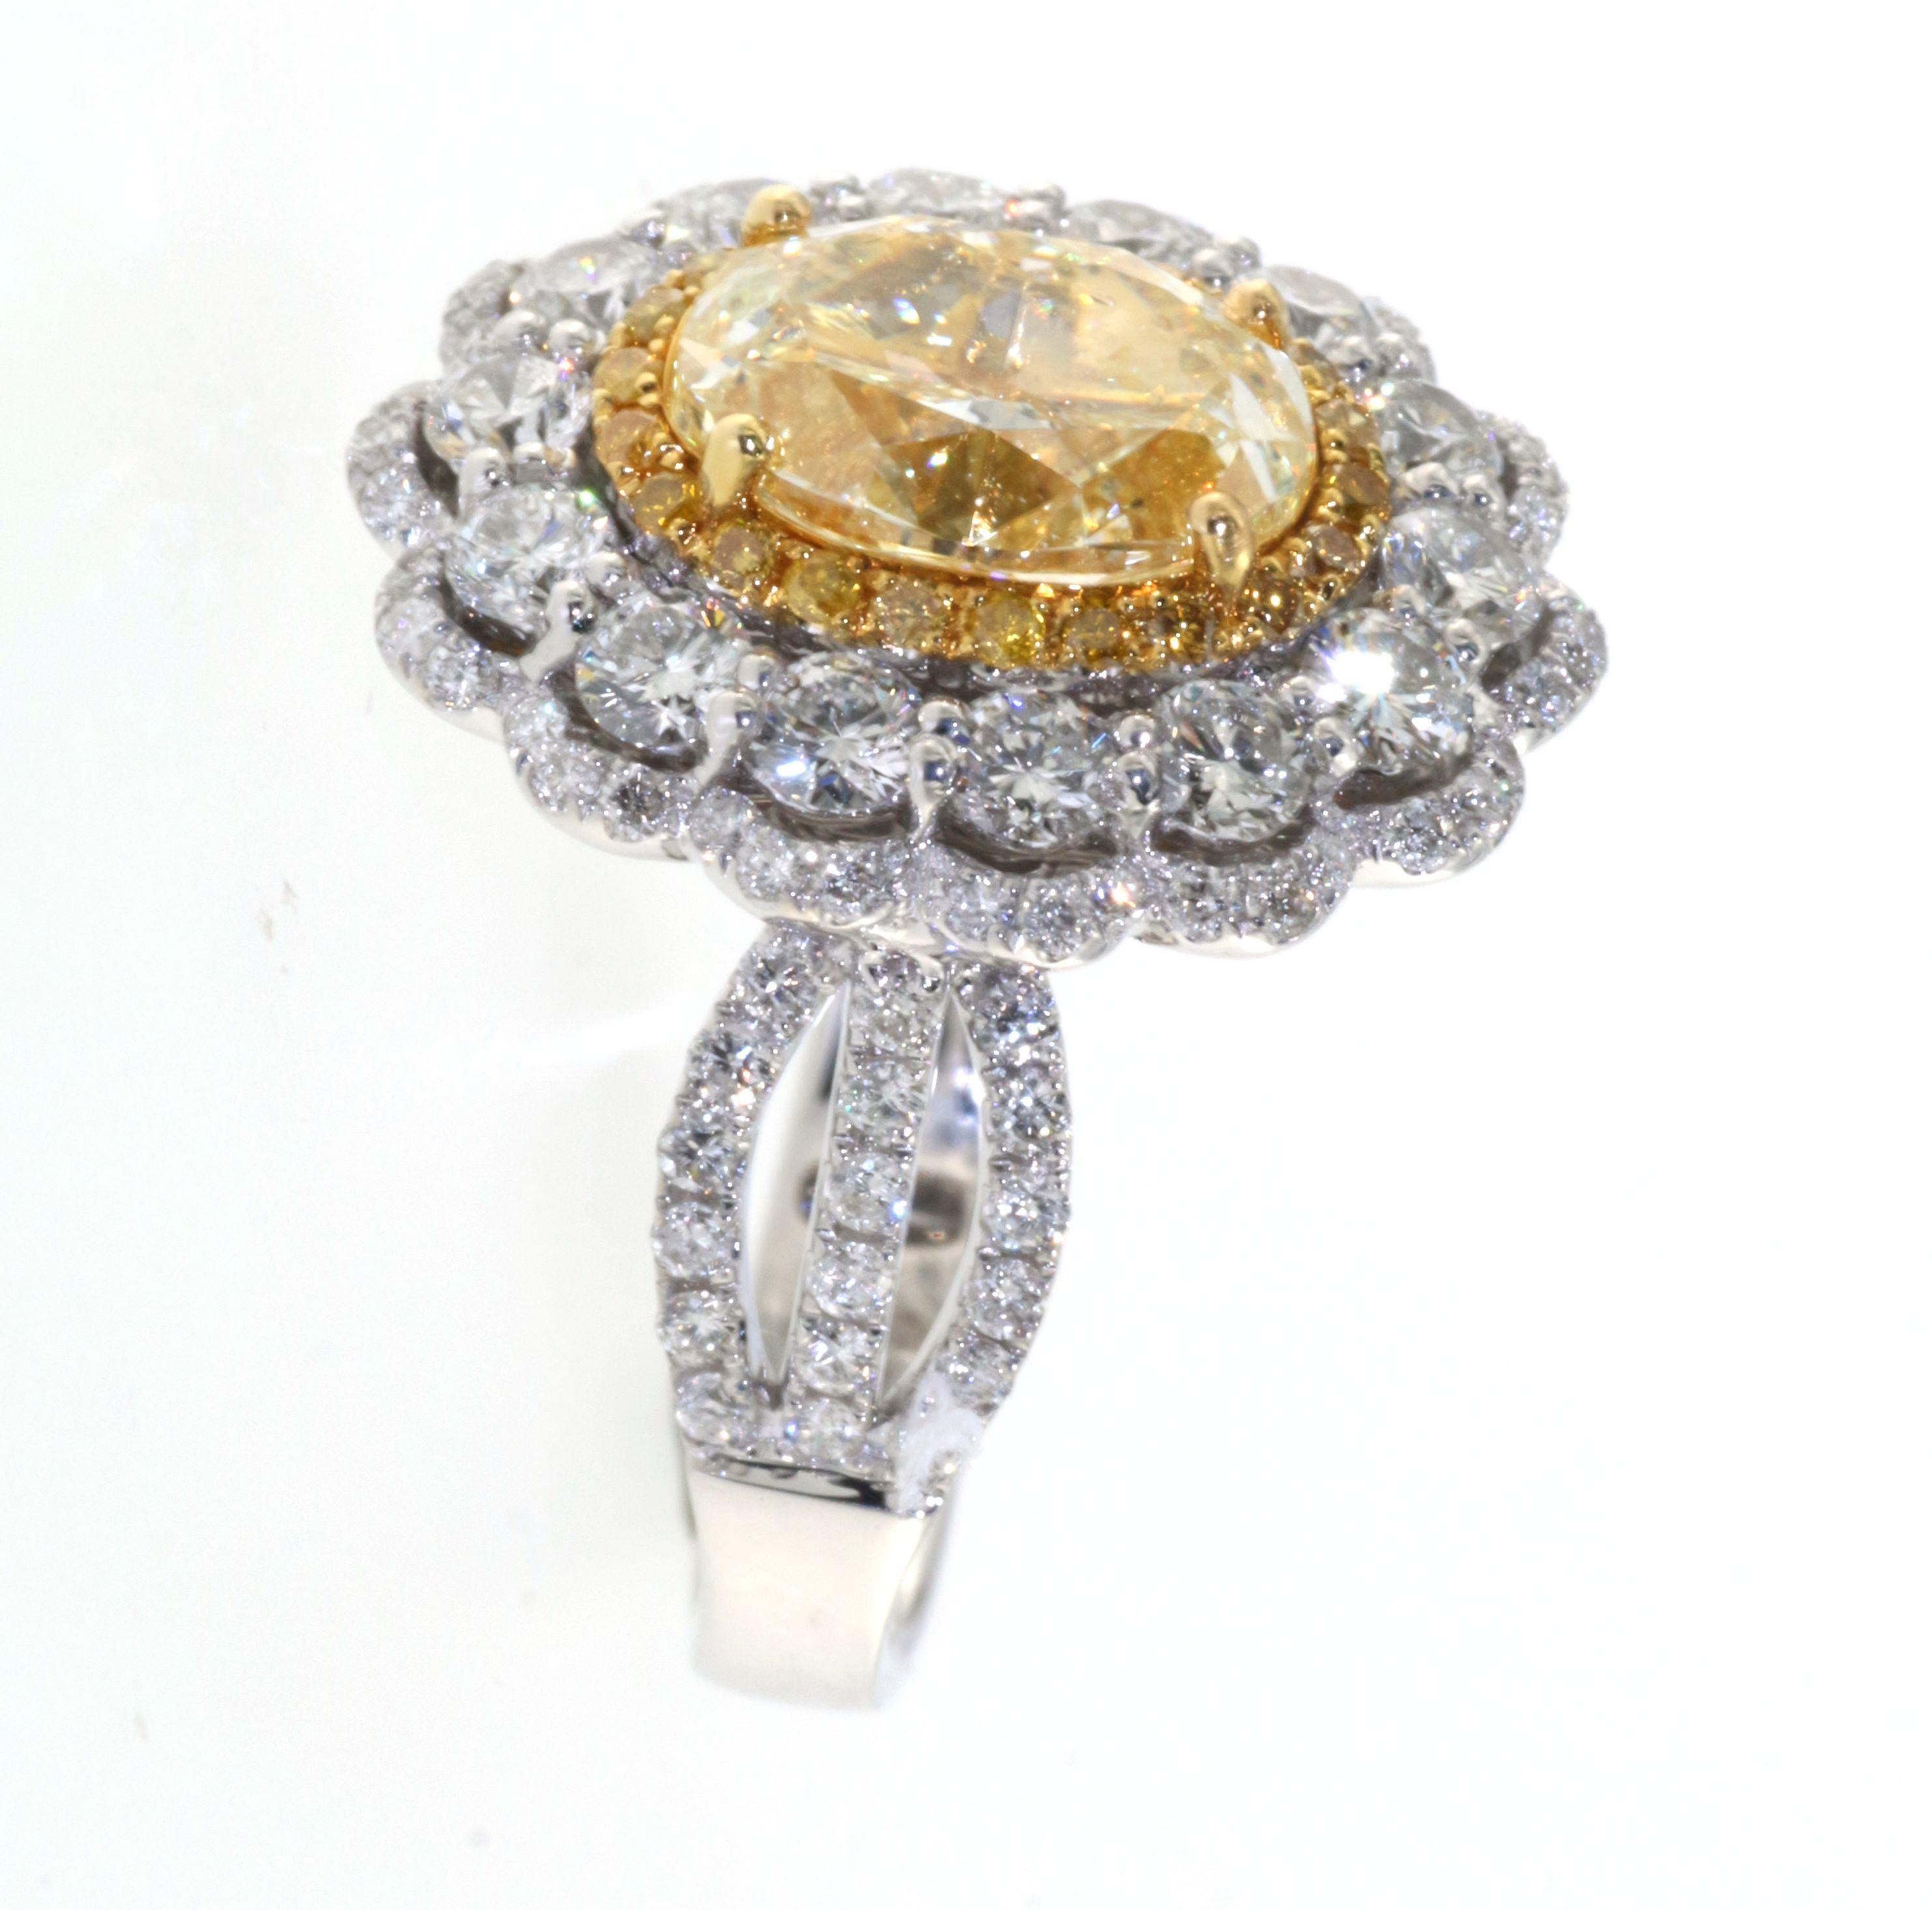 Contemporary IGI Certified 2.29 Carats N Color Yellow Diamond in 18 Karat Triple Halo Ring For Sale